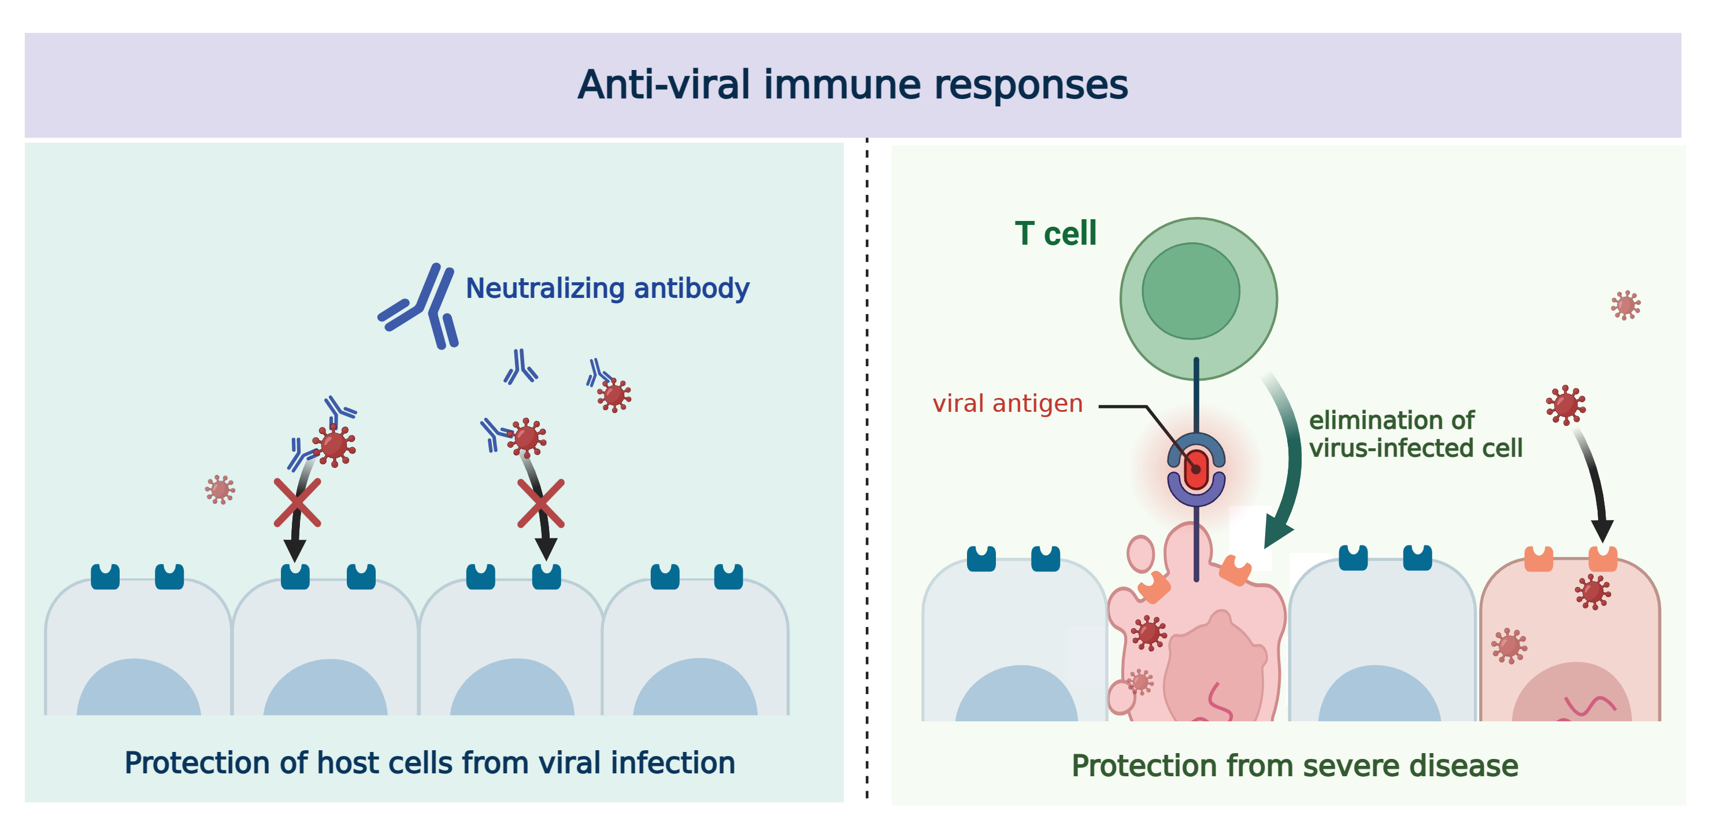 Figure 1. Immunological role of the neutralizing antibodies and memory T cells